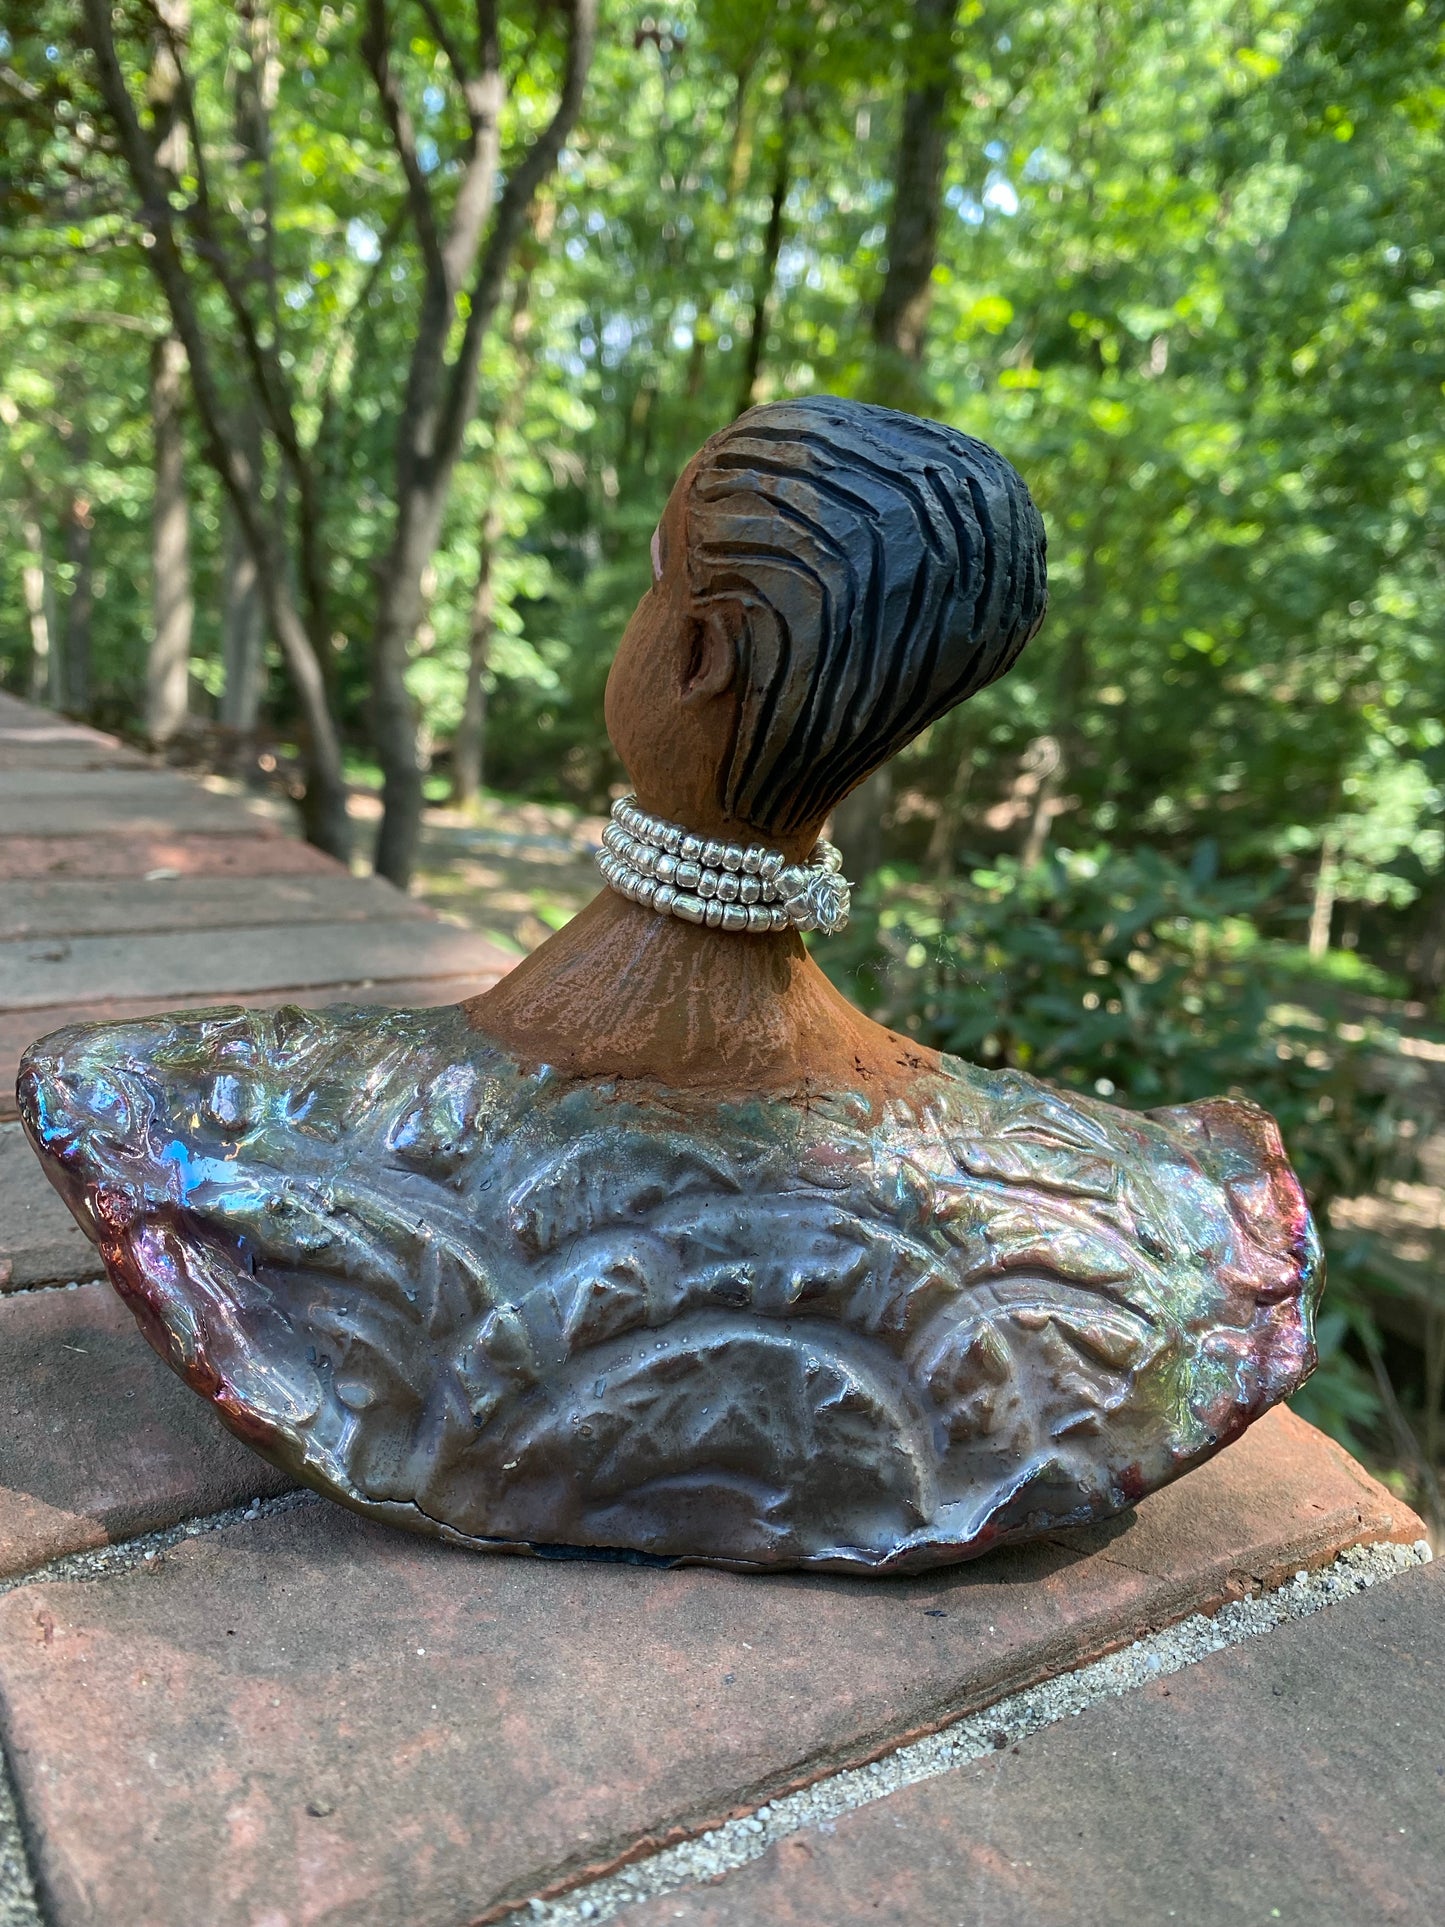 Belinda looks up with joy and anticipation! Belinda stands 6" x 8" x 4" and weighs 1.40 lbs. She has a beautiful textured copper robe trim. Belinda has braided clay hair. She has a honey brown complexion and soft light brown lips. Belinda will make for great conversation in your home.